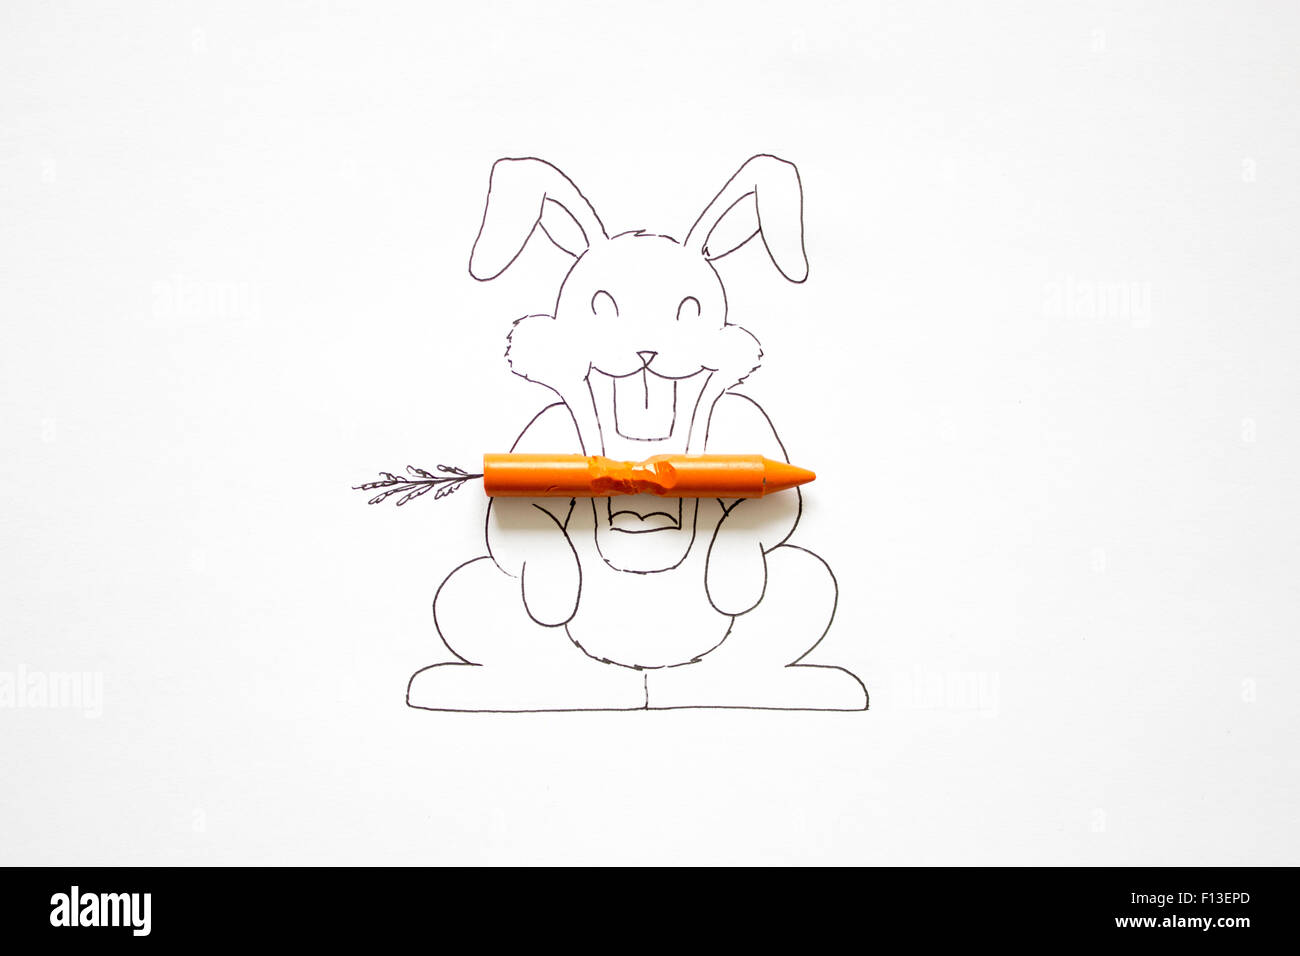 Conceptual drawing of a bunny rabbit eating a carrot Stock Photo